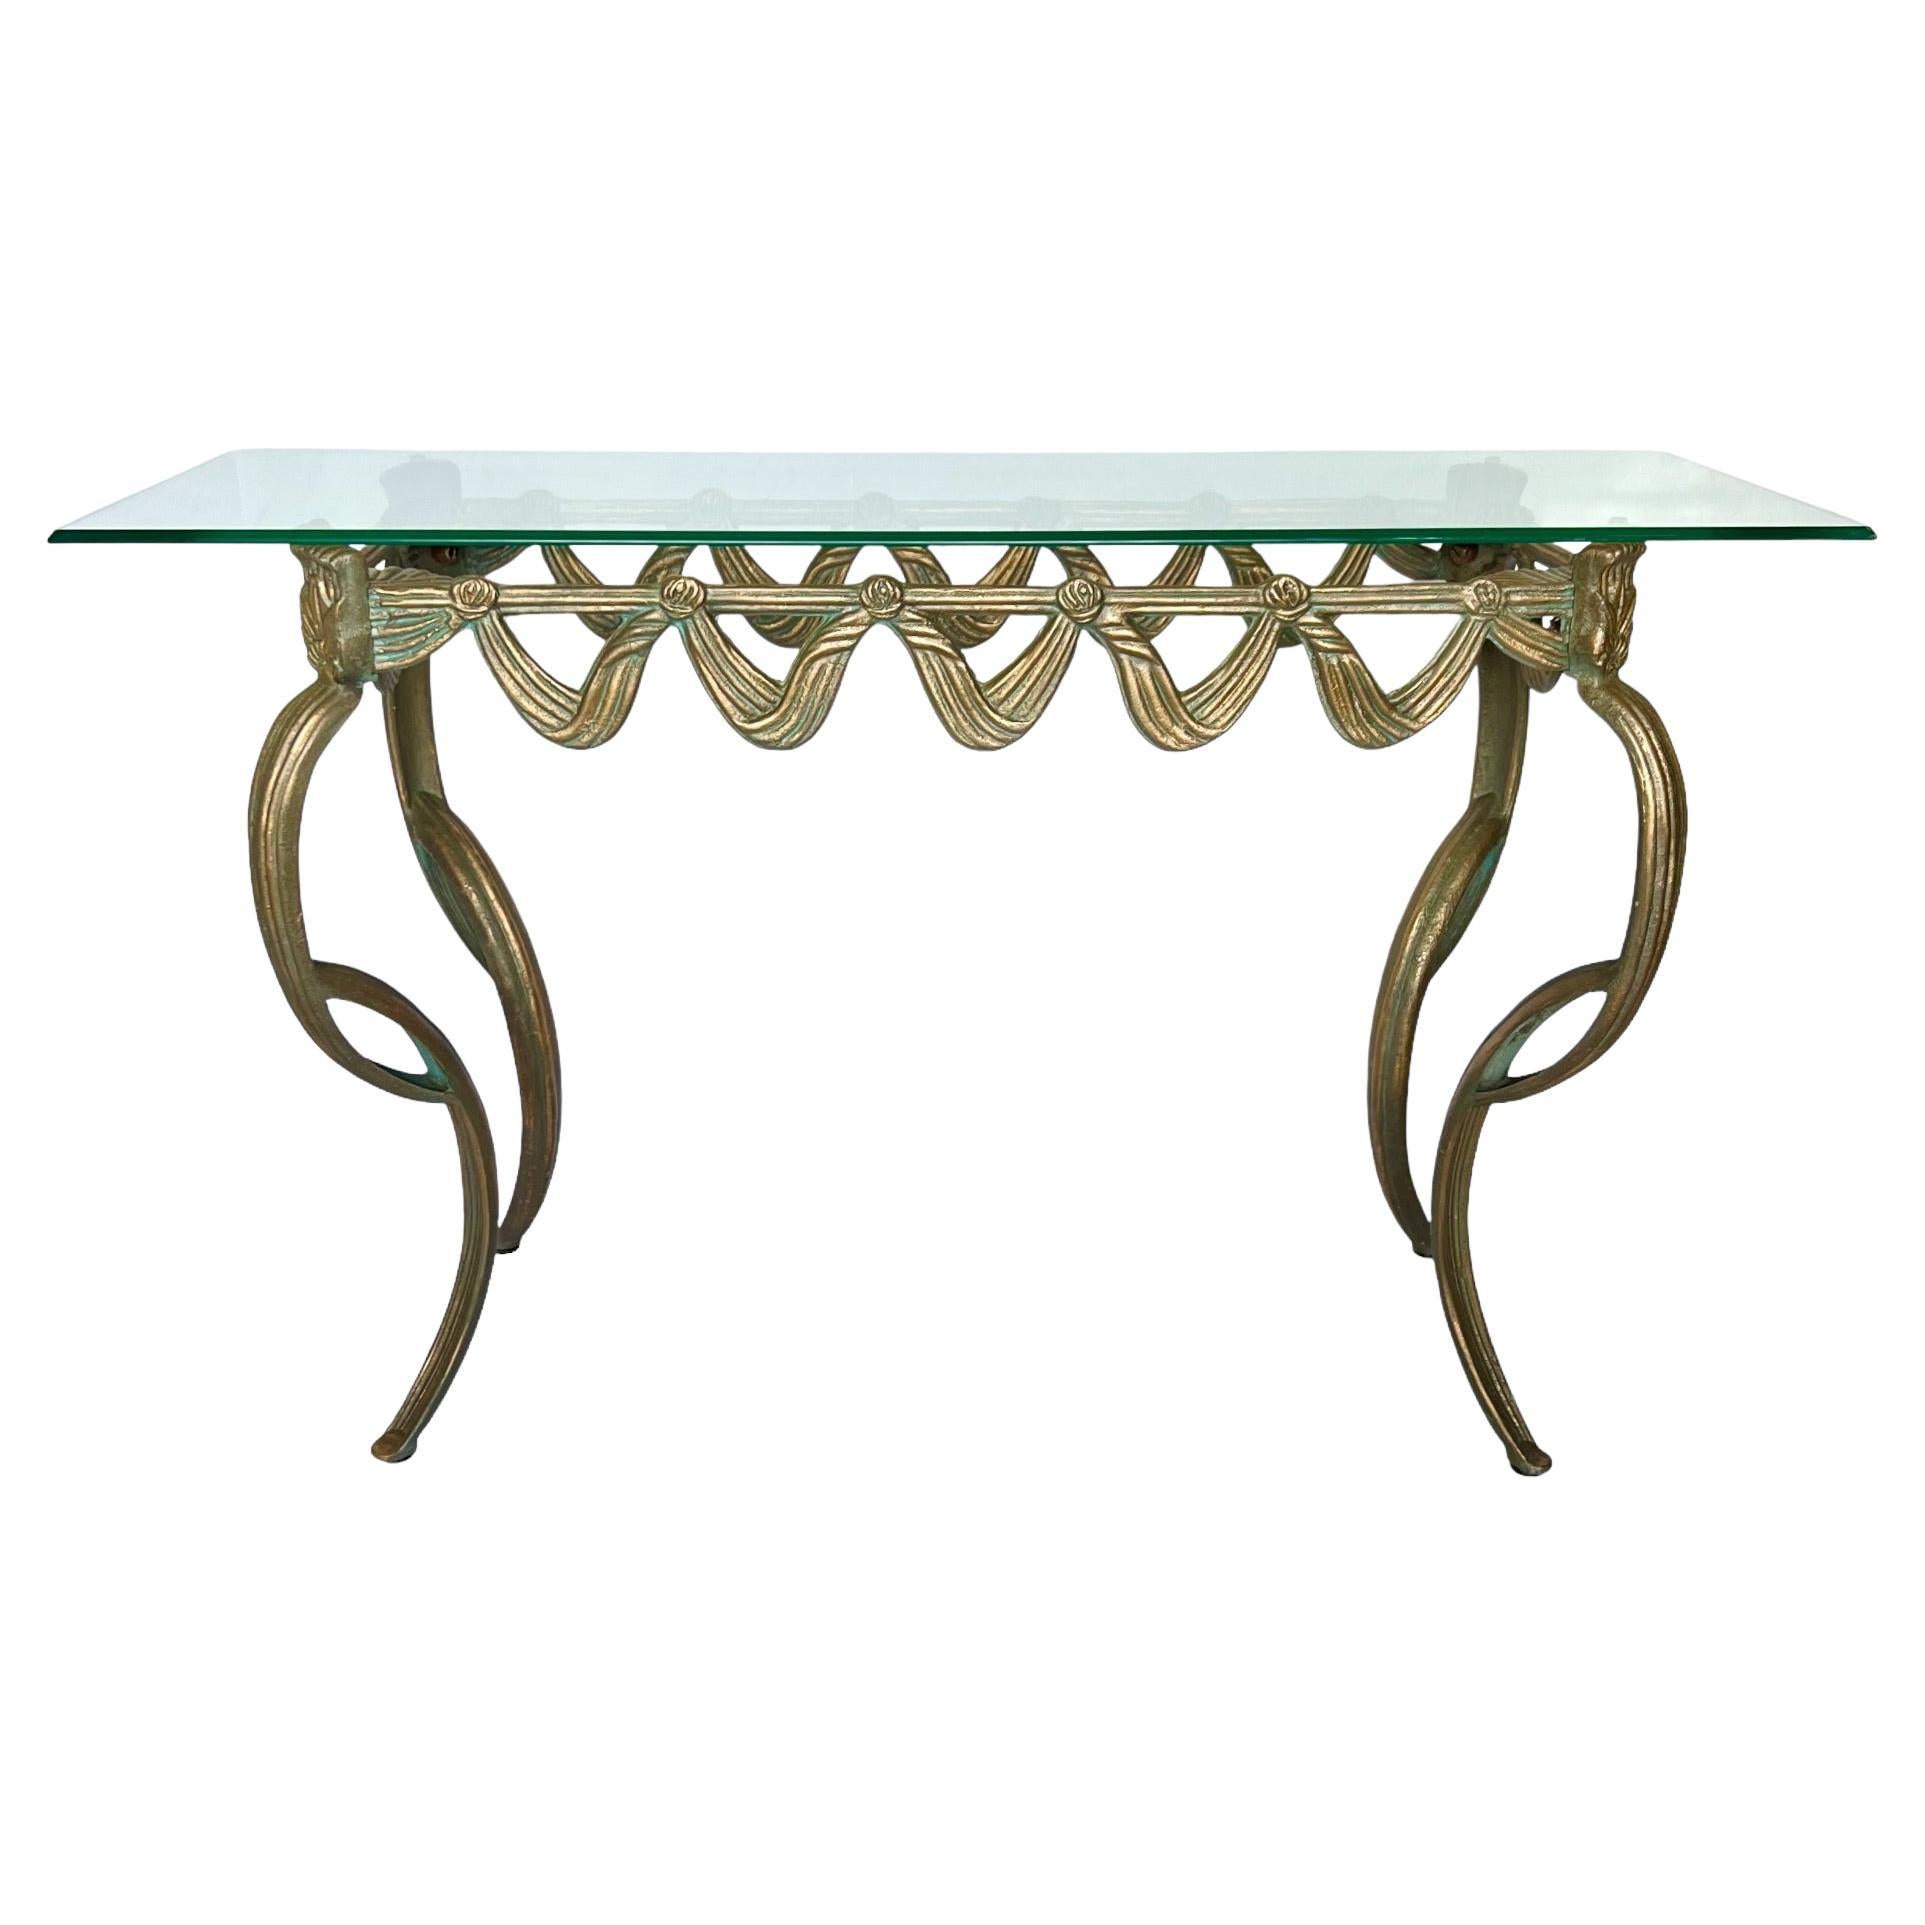 Gold Patinated Cast Metal Cabriole Console Table, Late 20th C. For Sale